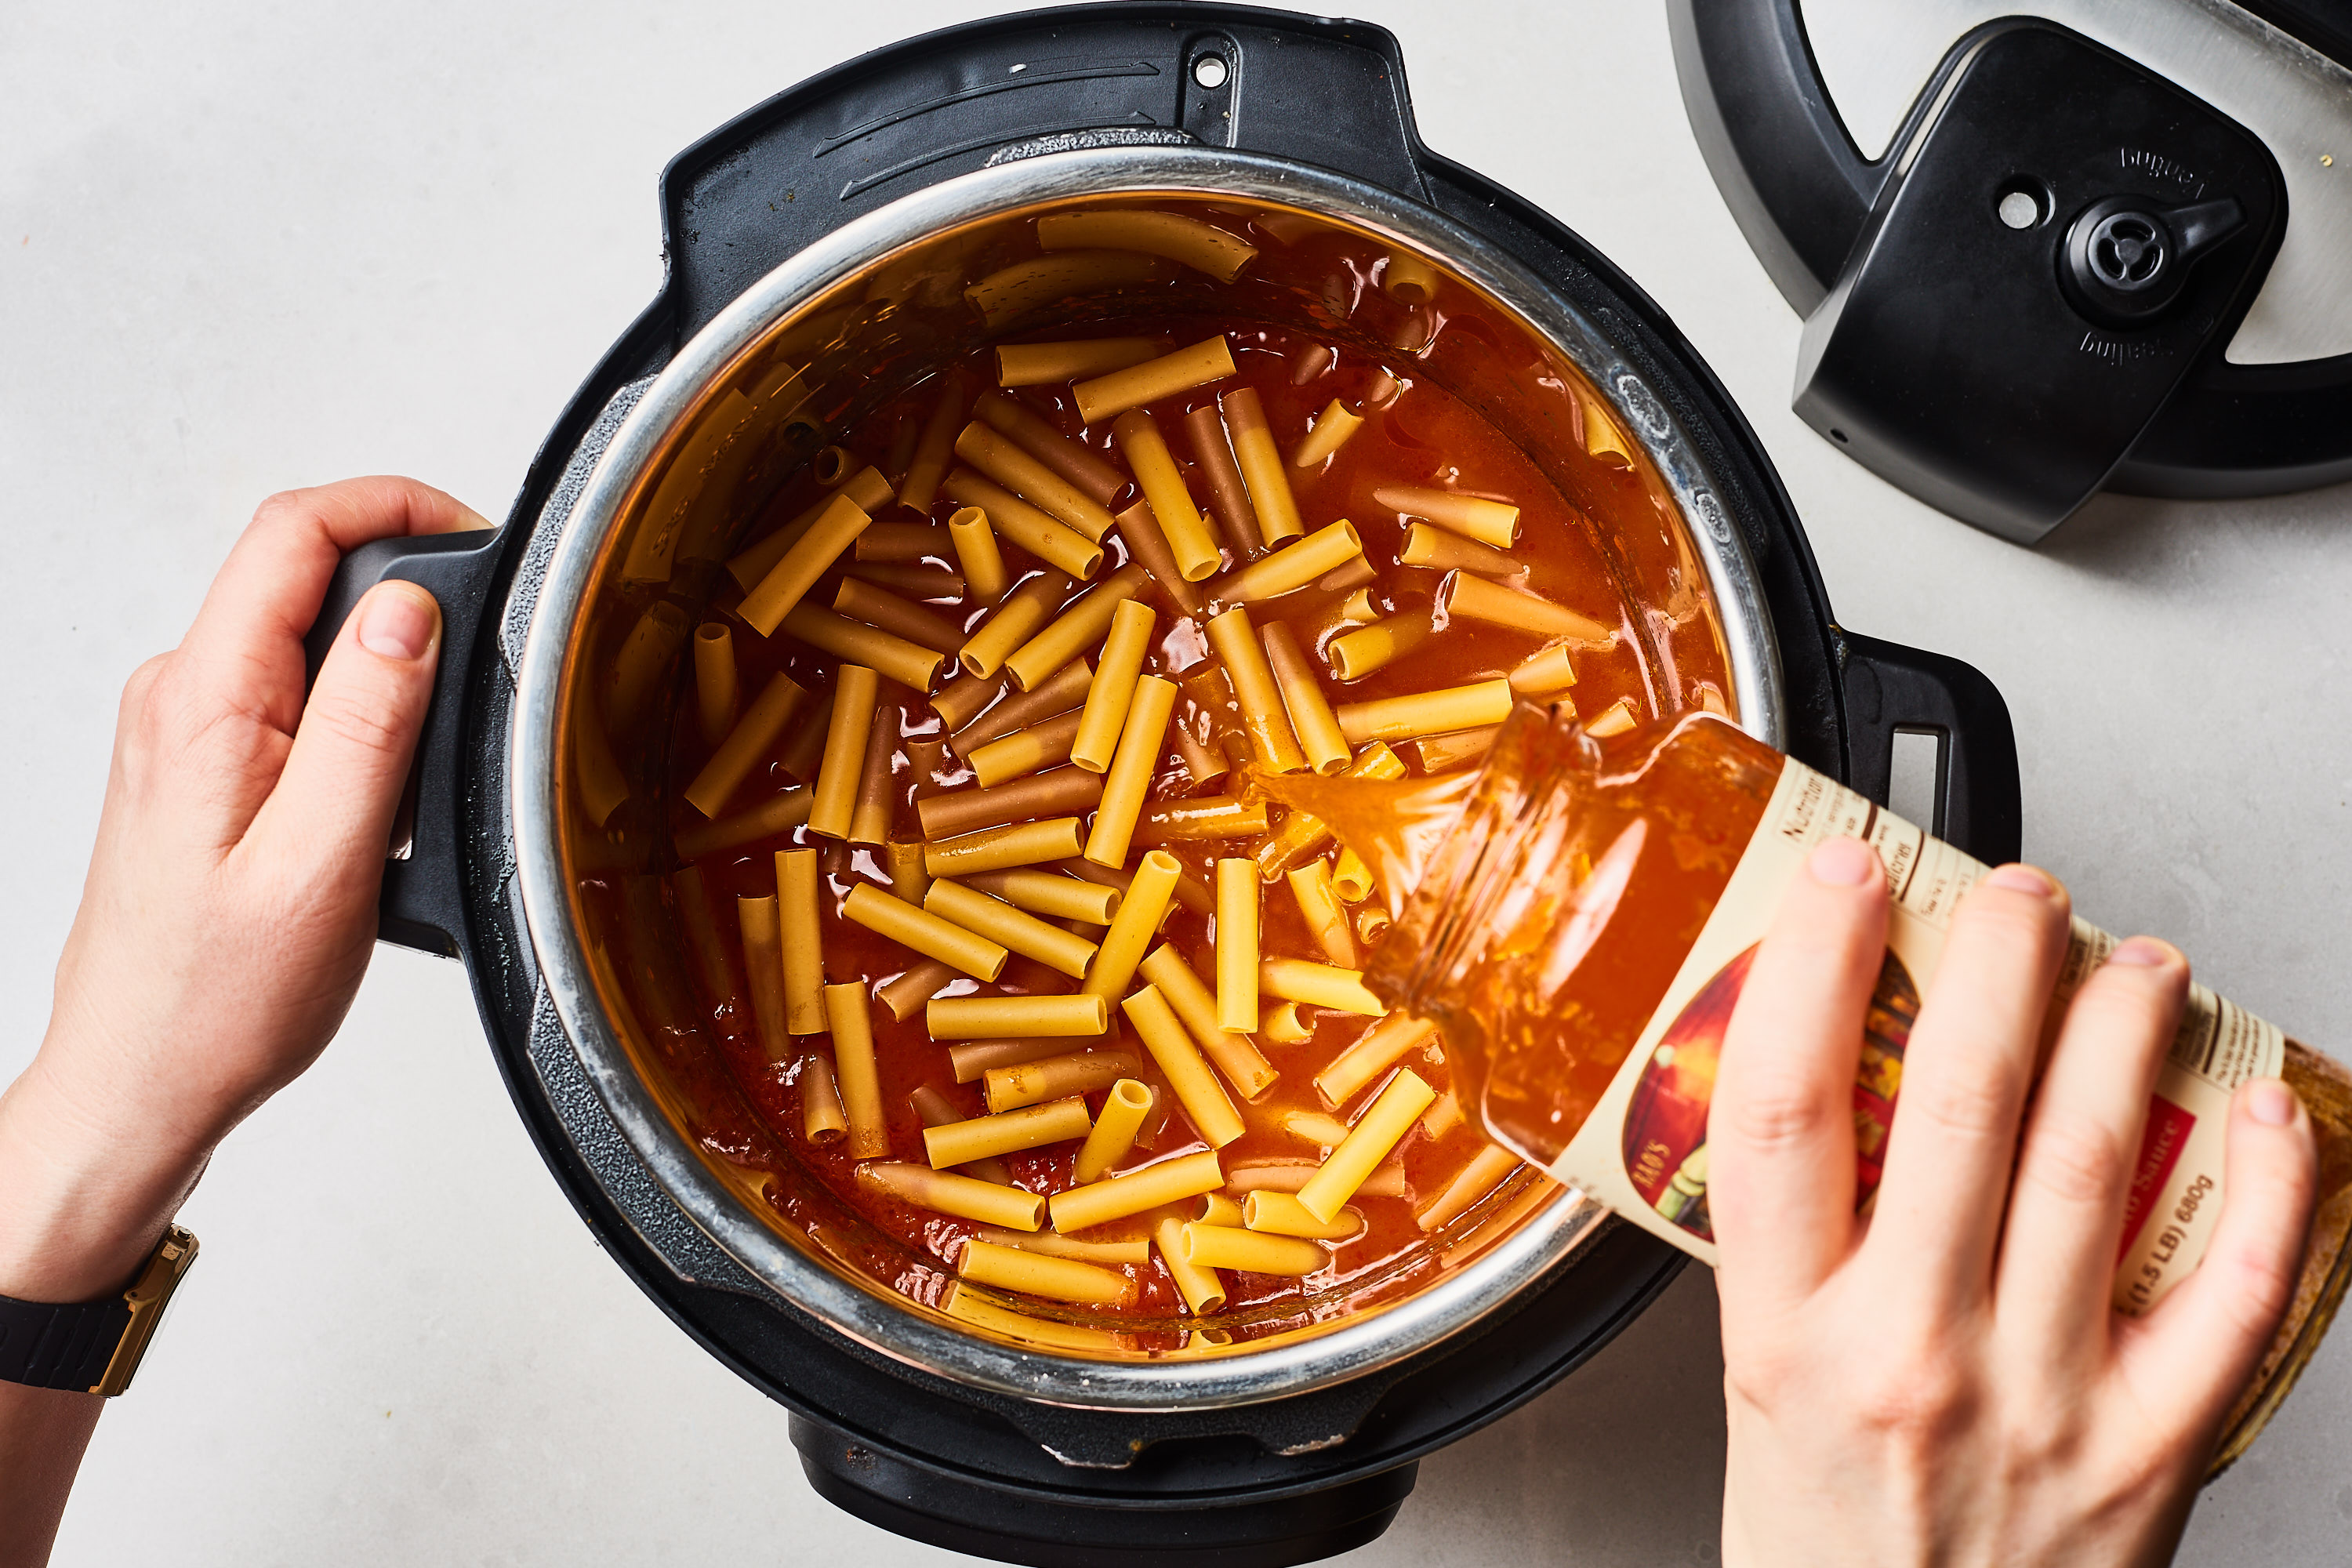 Is the 3 Qt. Mini Instant Pot Right for You? 